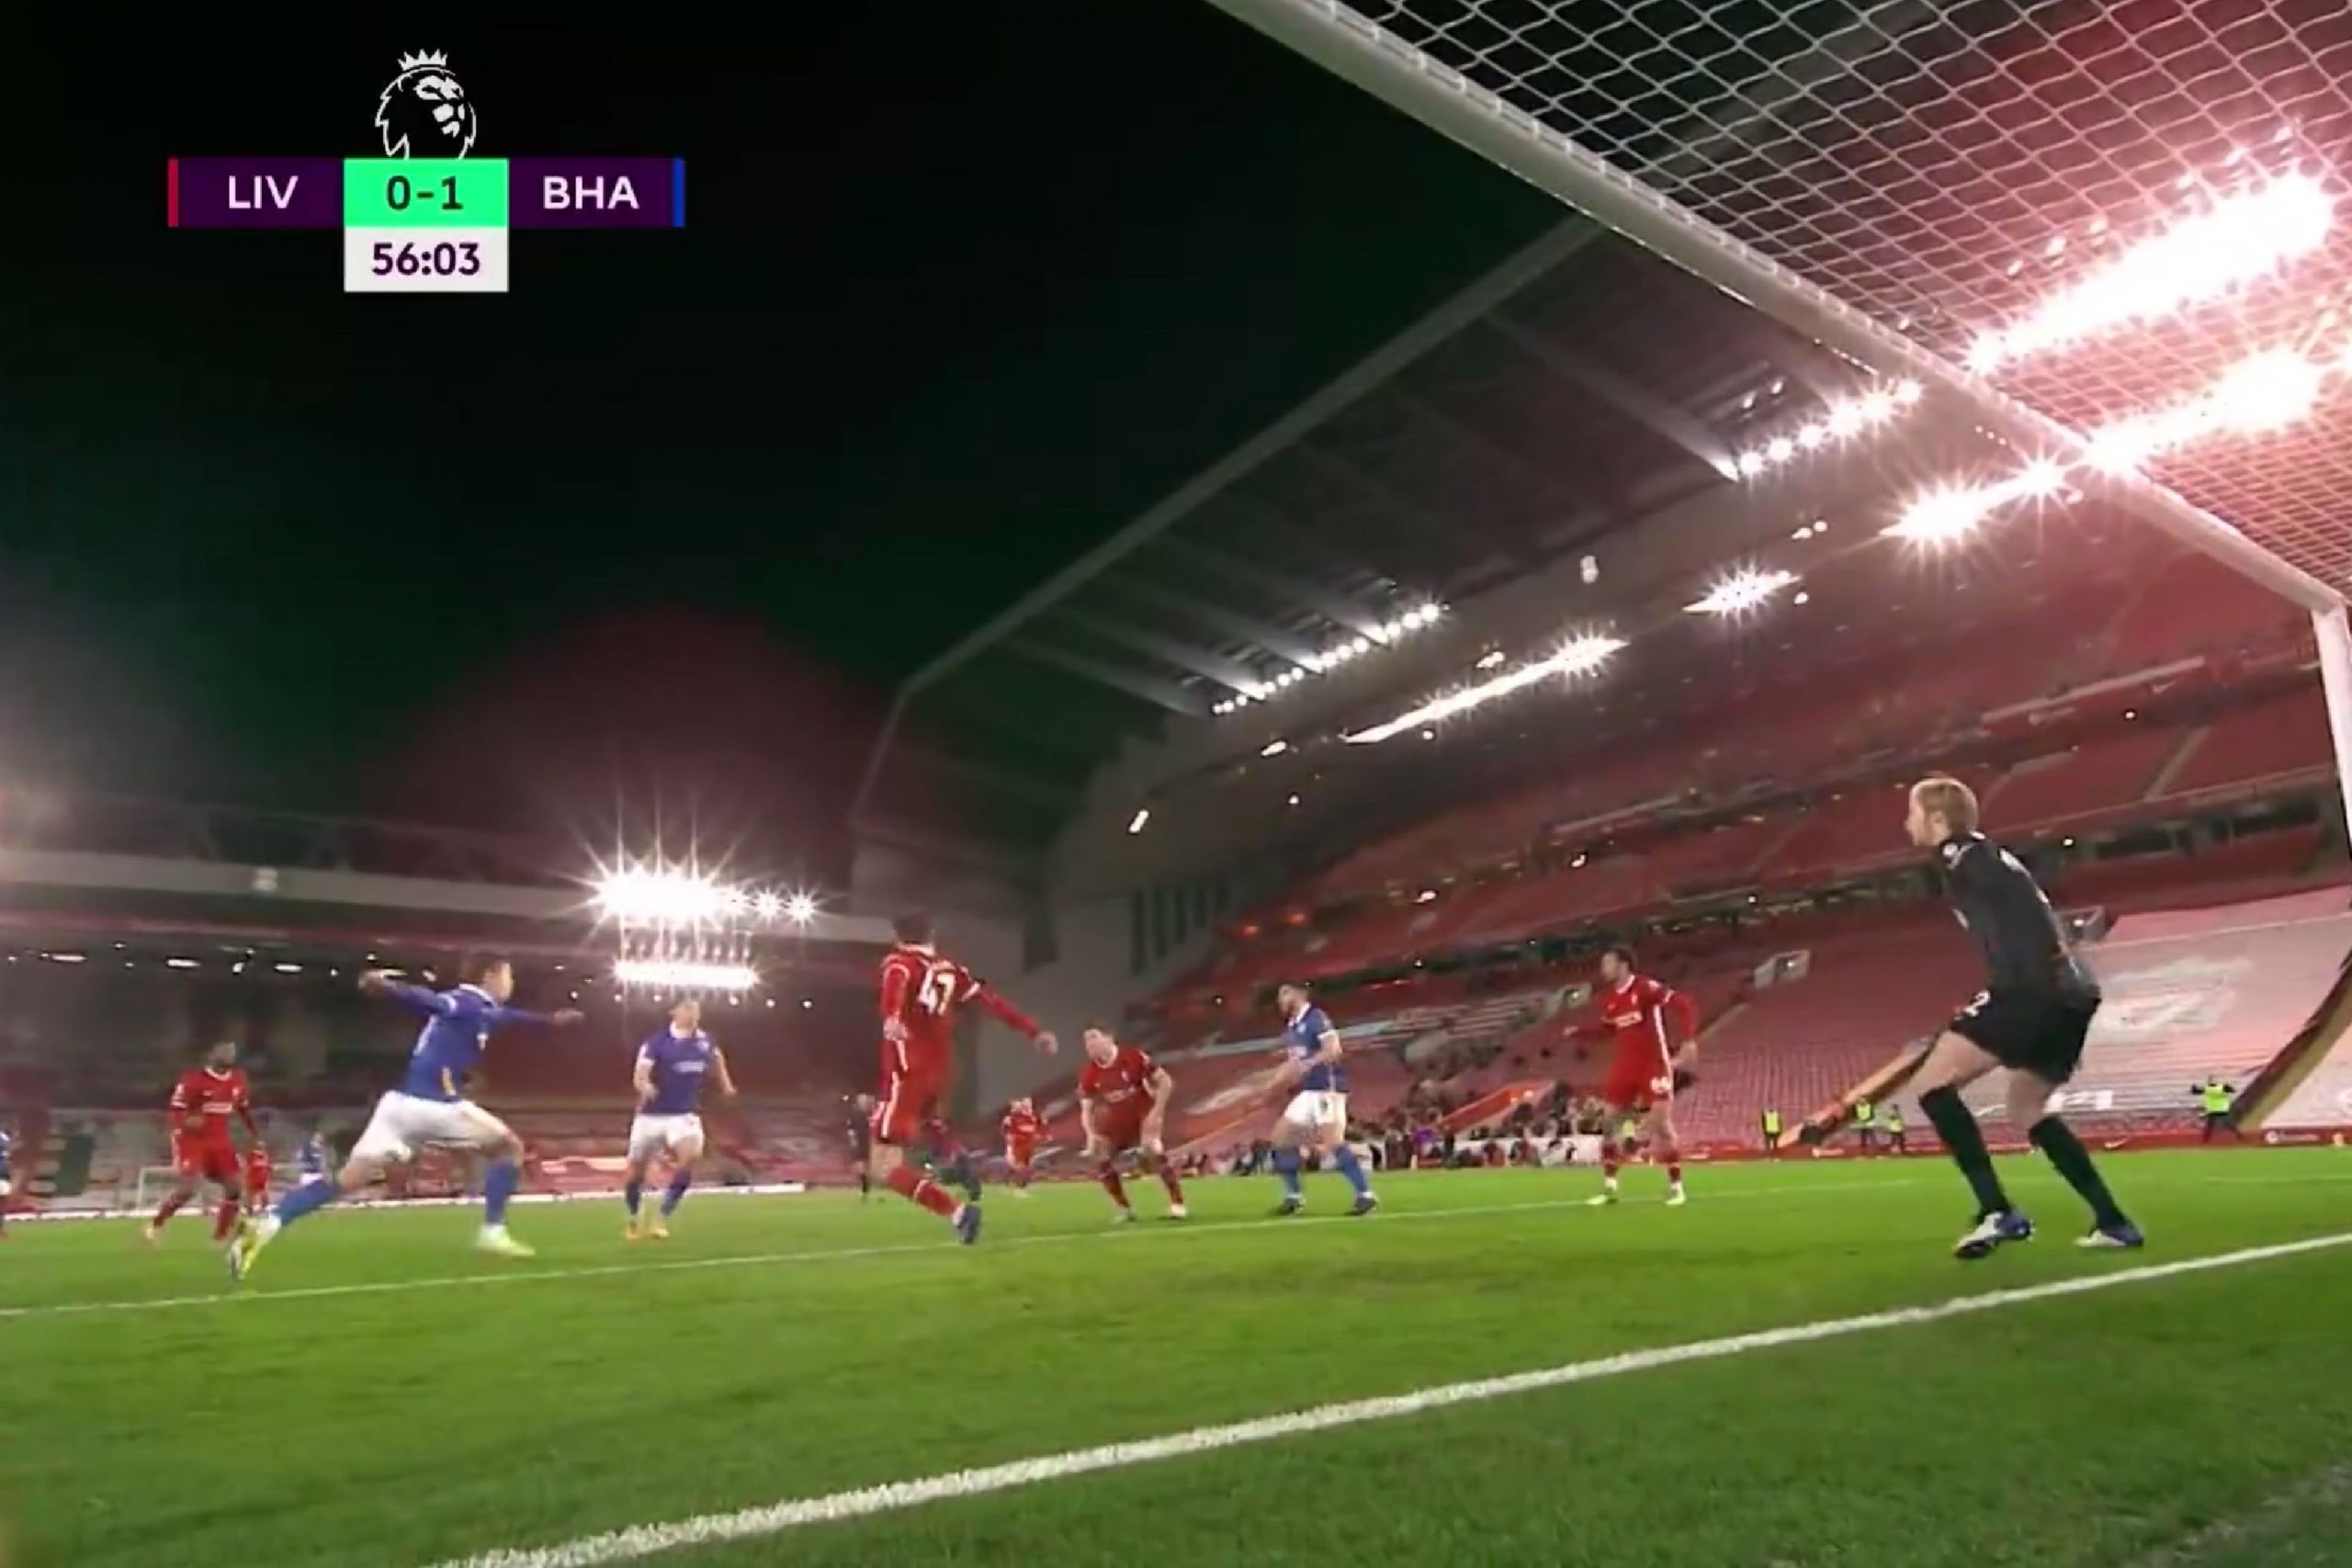 Liverpool 0-1 Brighton Highlights: Steven Alzate finishes off incredible team goal